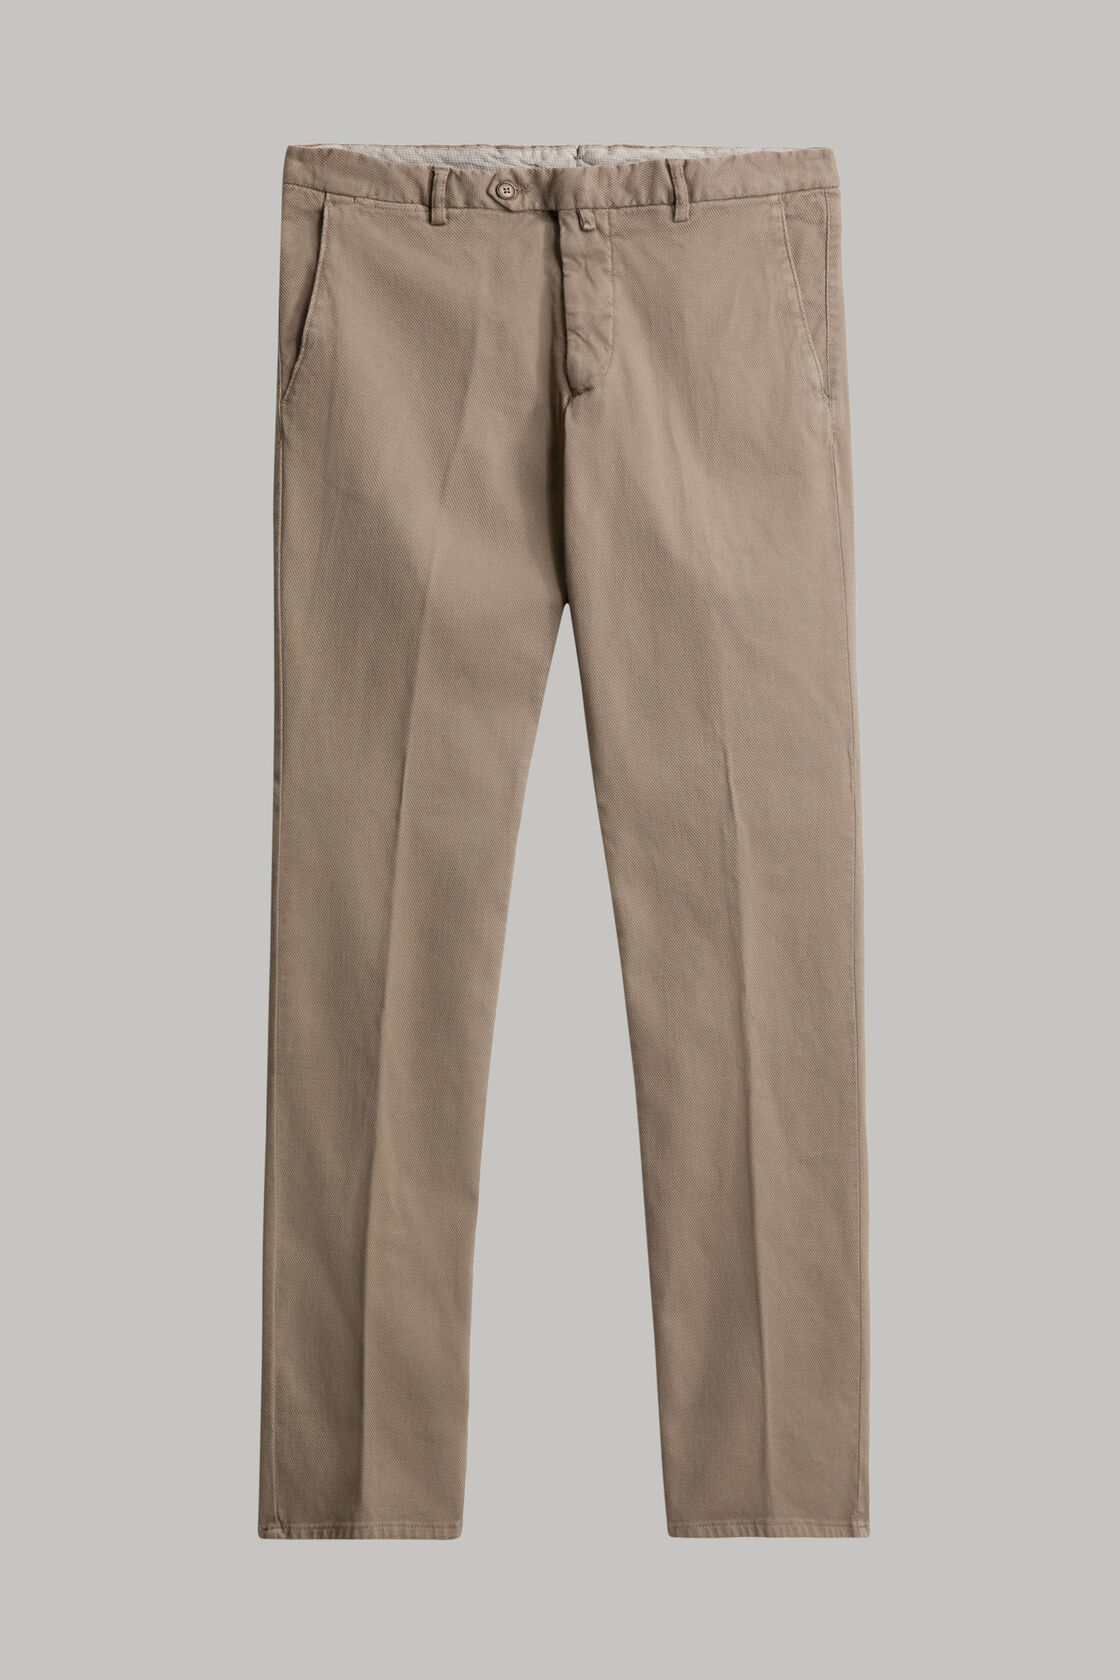 Cotton structured tencel trousers, , hi-res